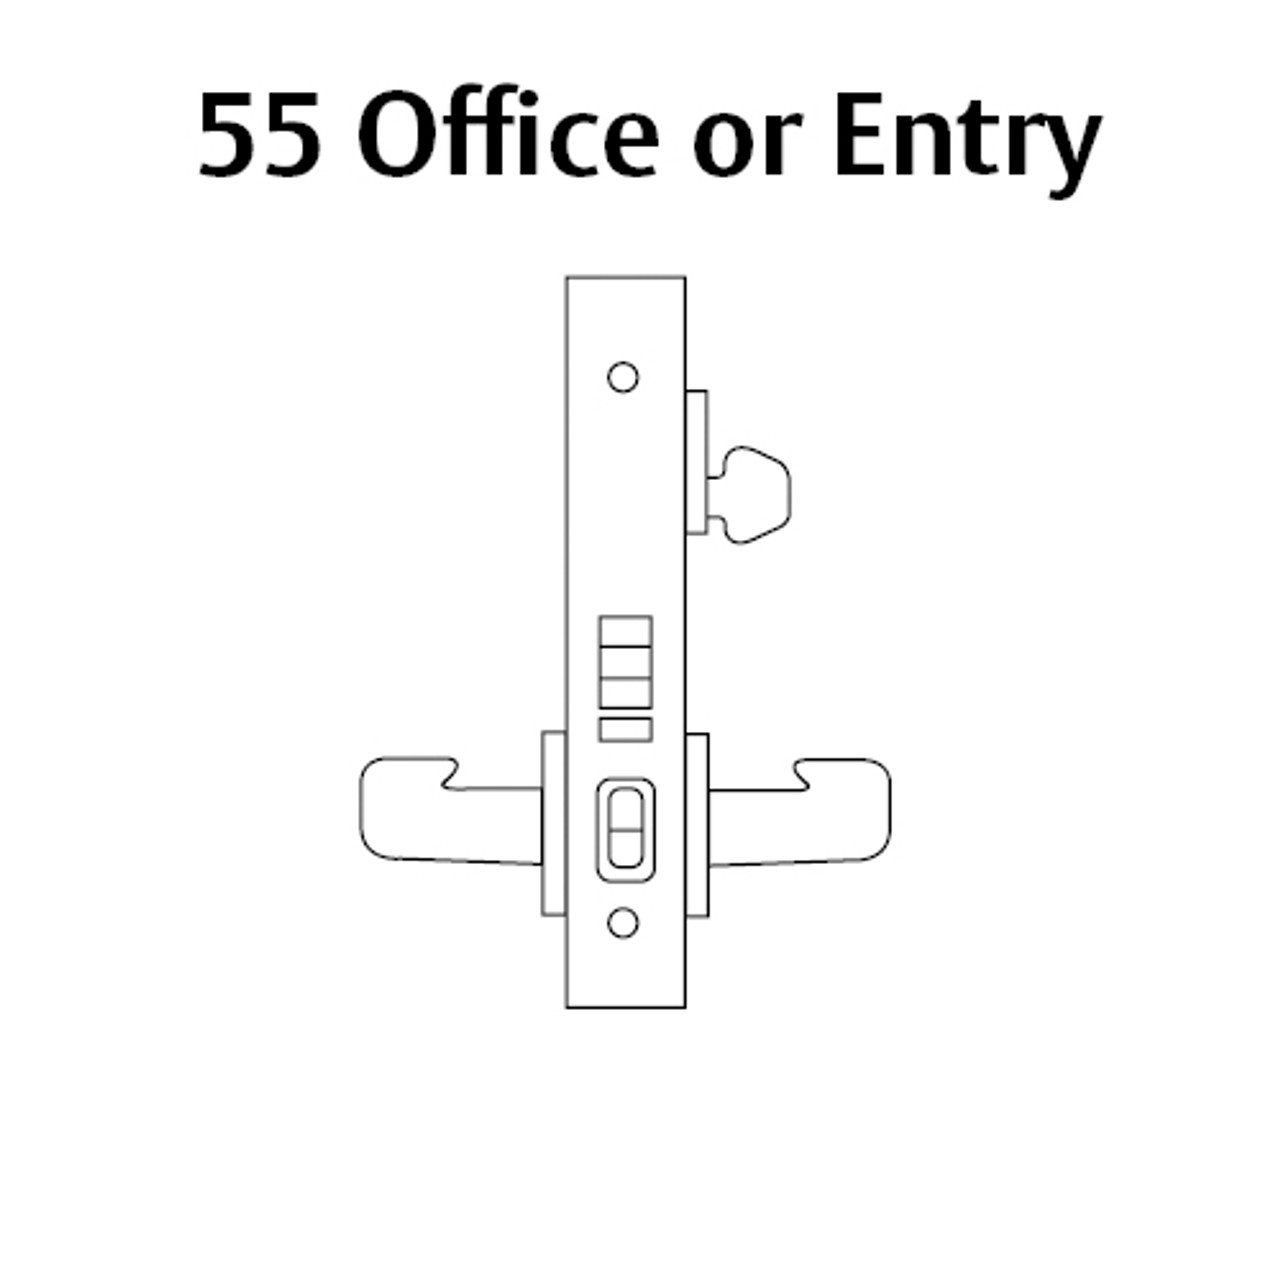 LC-8255-LNL-26 Sargent 8200 Series Office or Entry Mortise Lock with LNL Lever Trim Less Cylinder in Bright Chrome